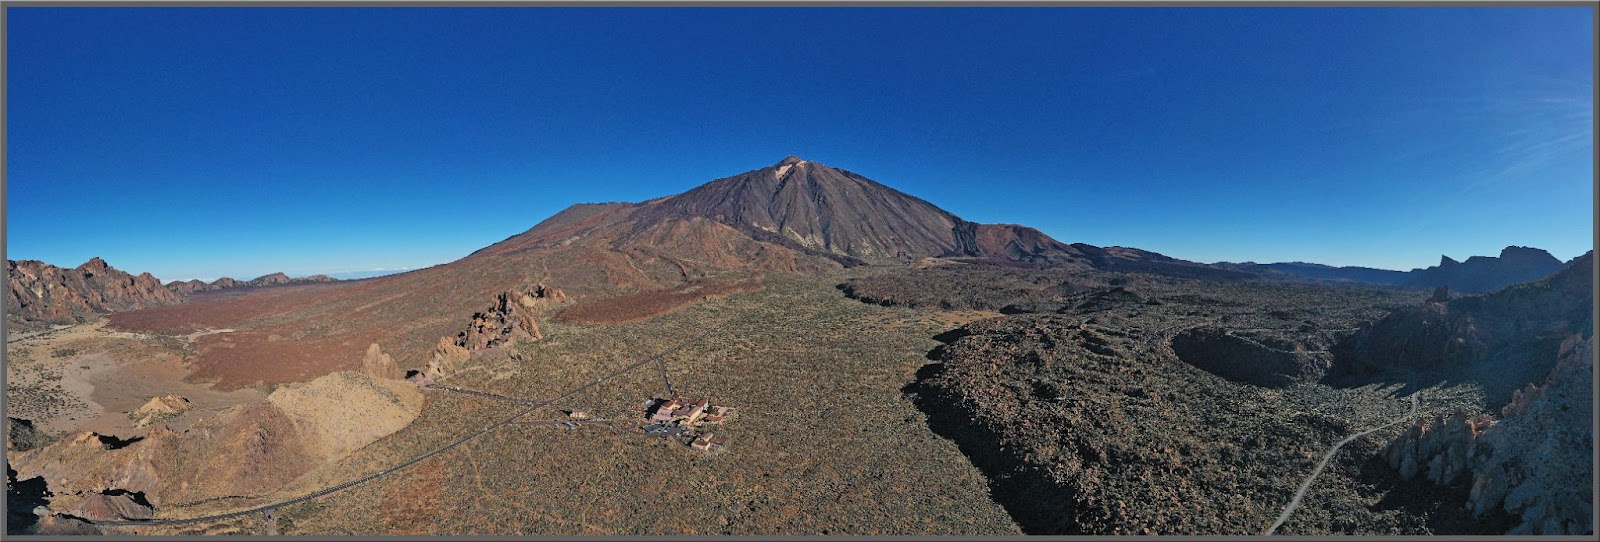 Panoramic view of Mt. Tiede